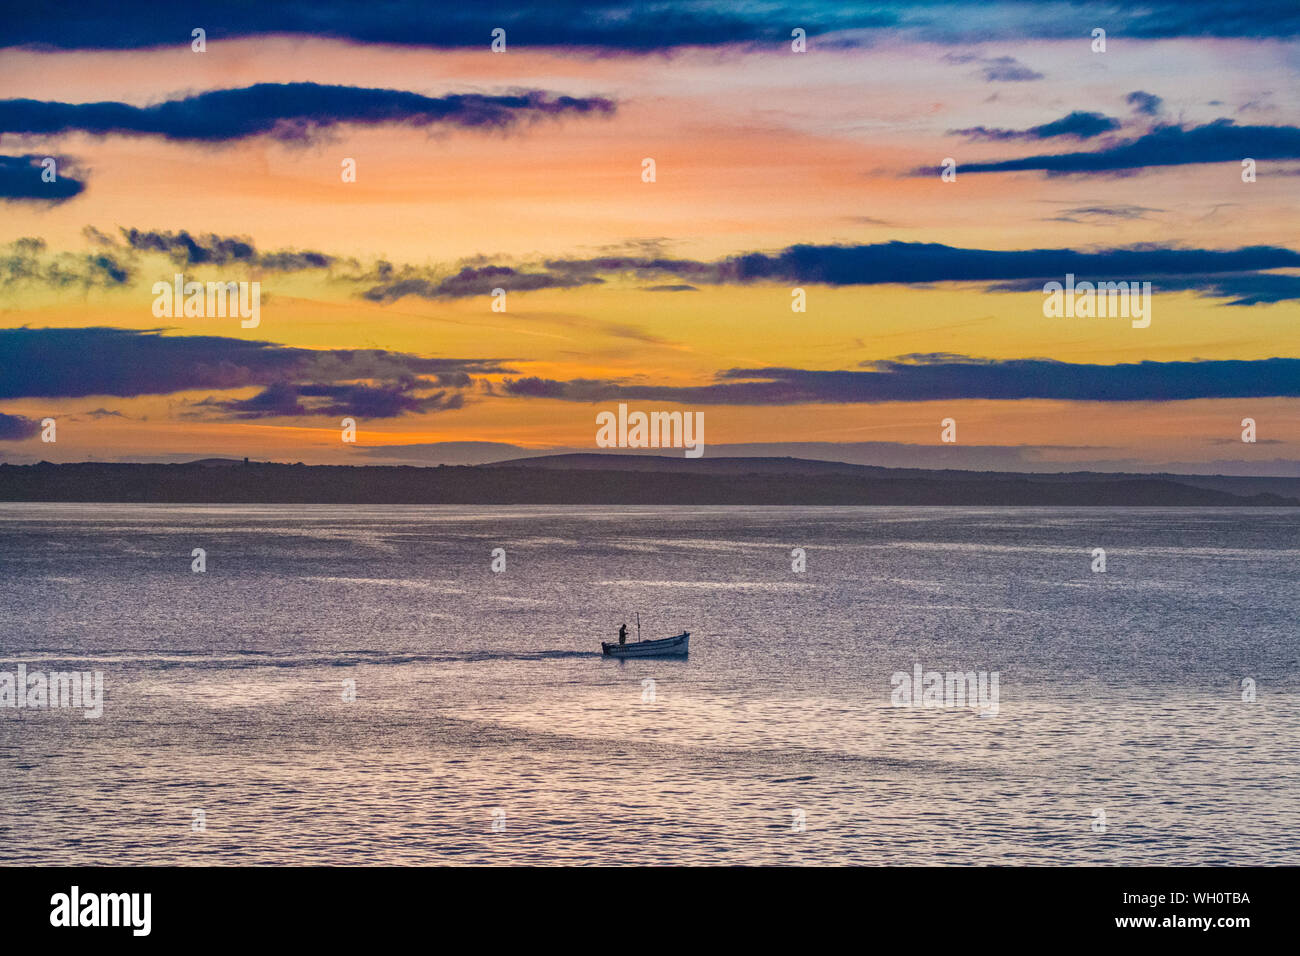 Newlyn, Cornwall, UK. 2nd September 2019. UK Weather. Clouds moved in at sunrise, bringing light showers, with the sun just managing to break through a gap in the approaching clouds.  Credit Simon Maycock / Alamy Live News. Stock Photo